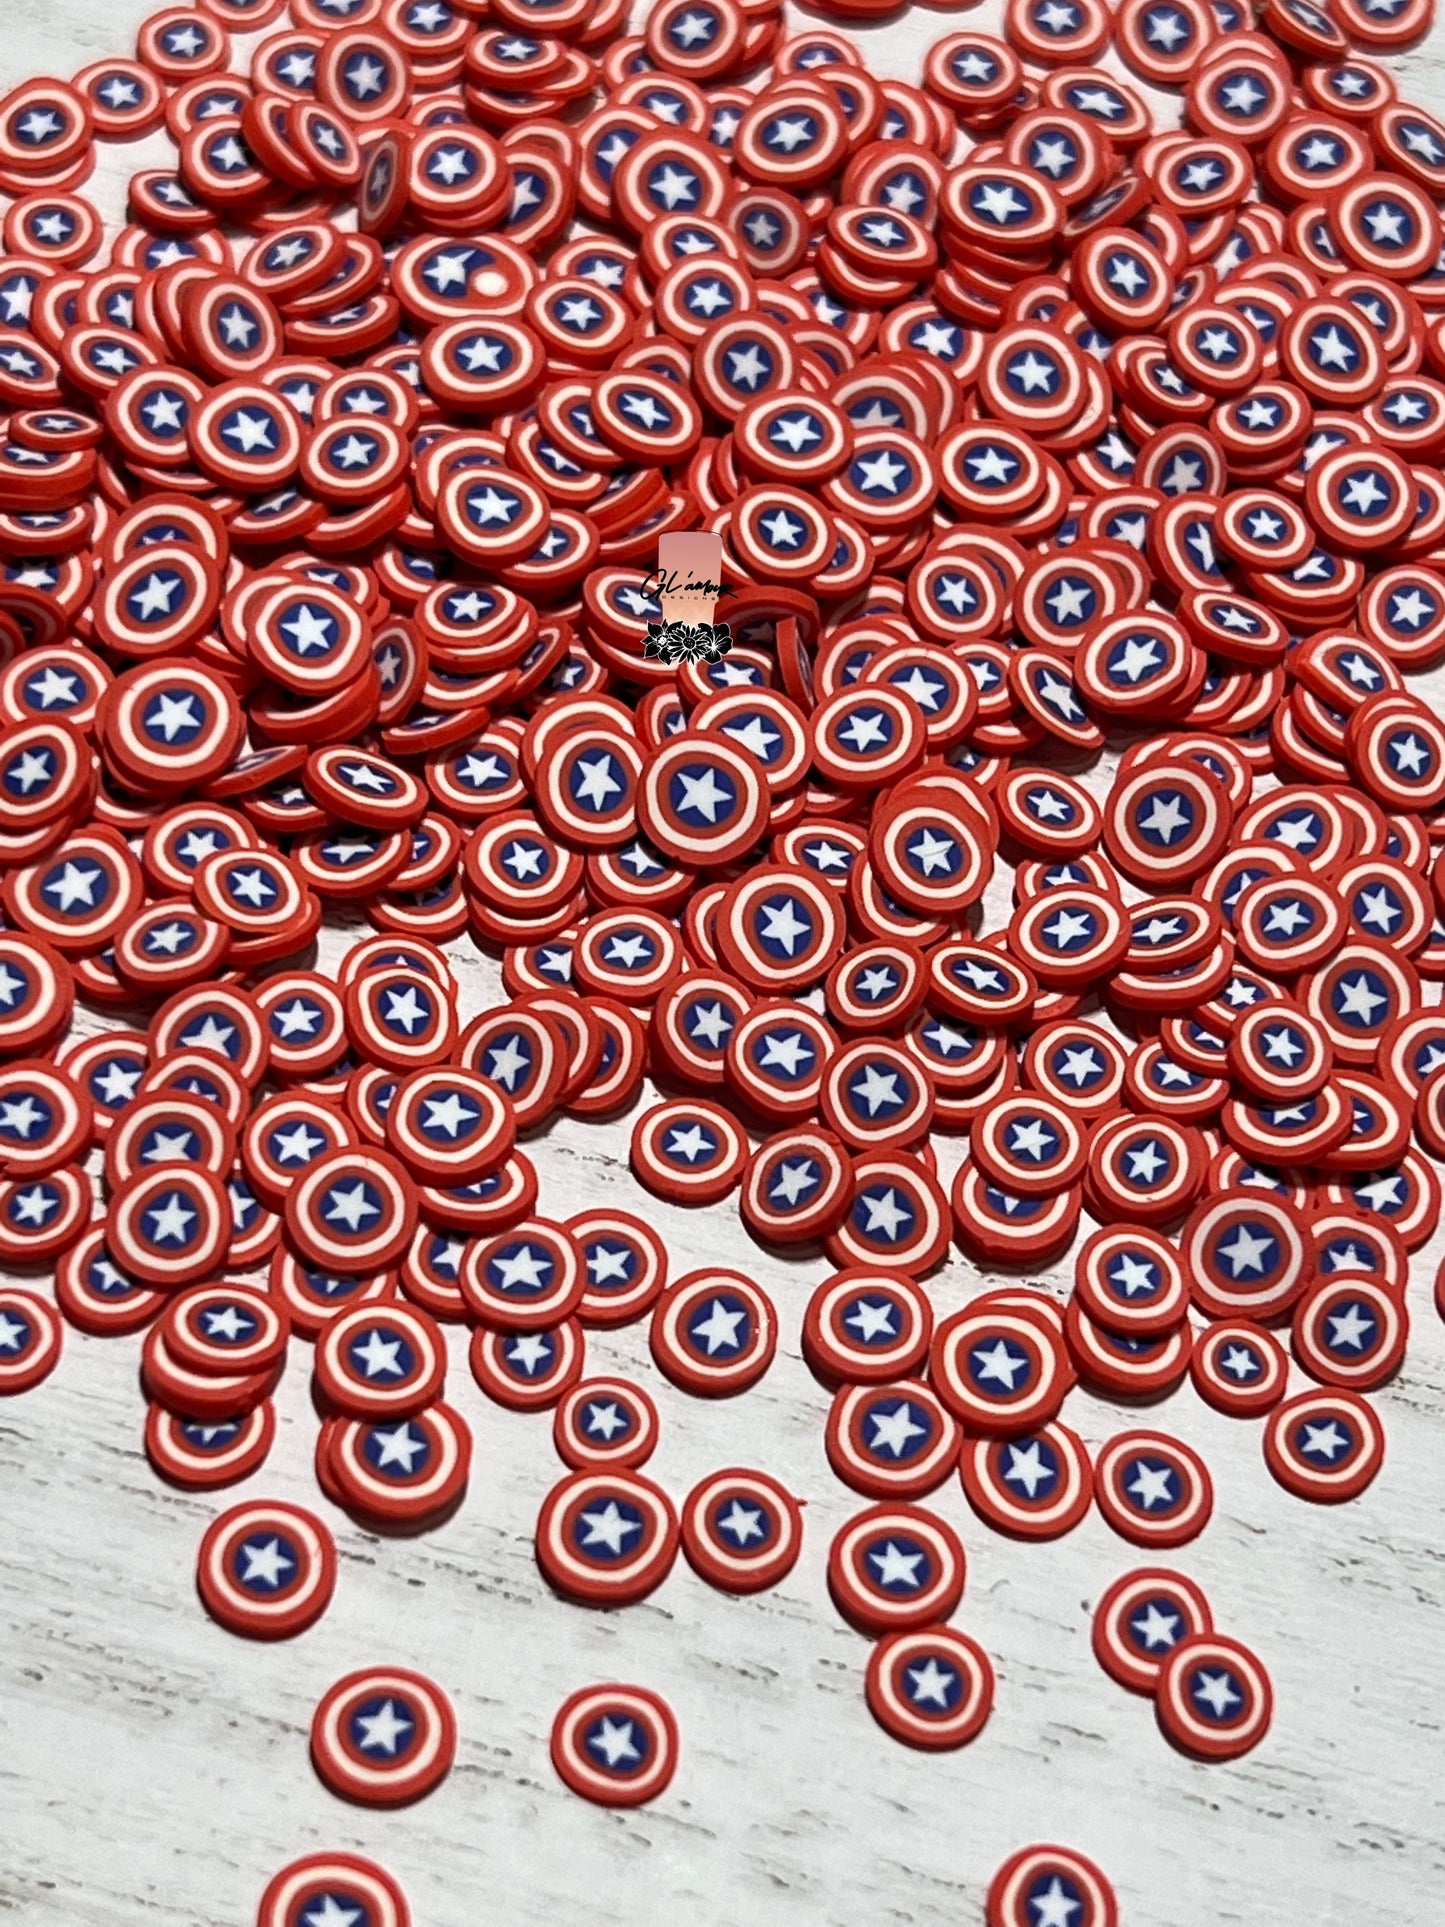 America's Shield Polymer Slices - 5mm Small